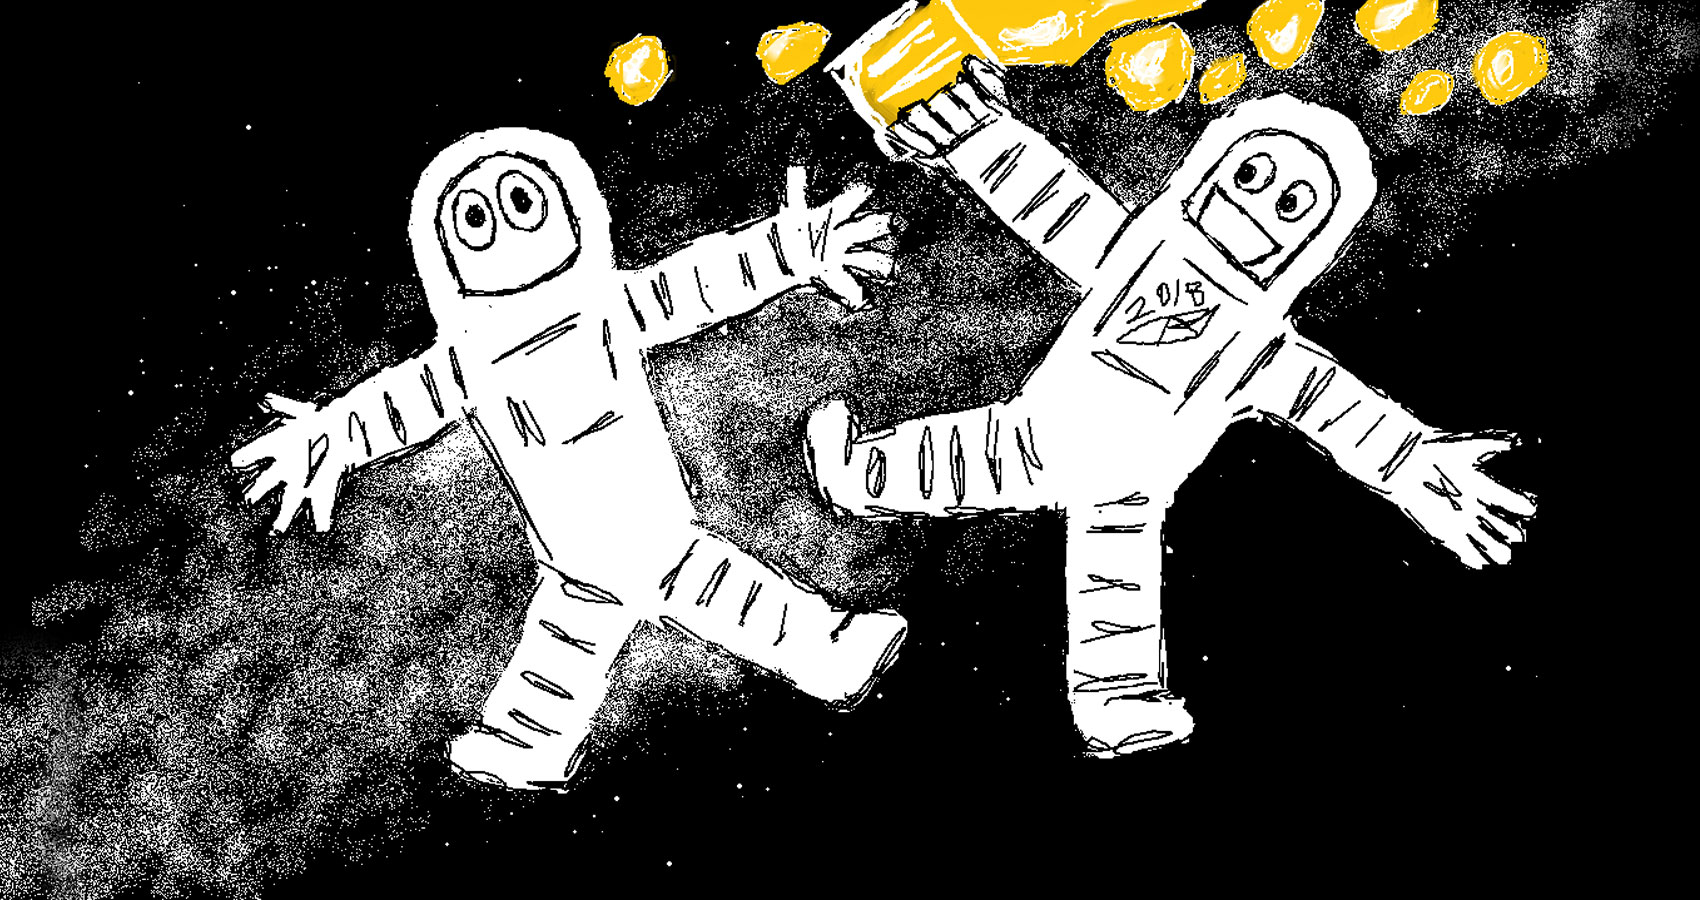 Space Party, written by Robyn MacKinnon at Spillwords.com